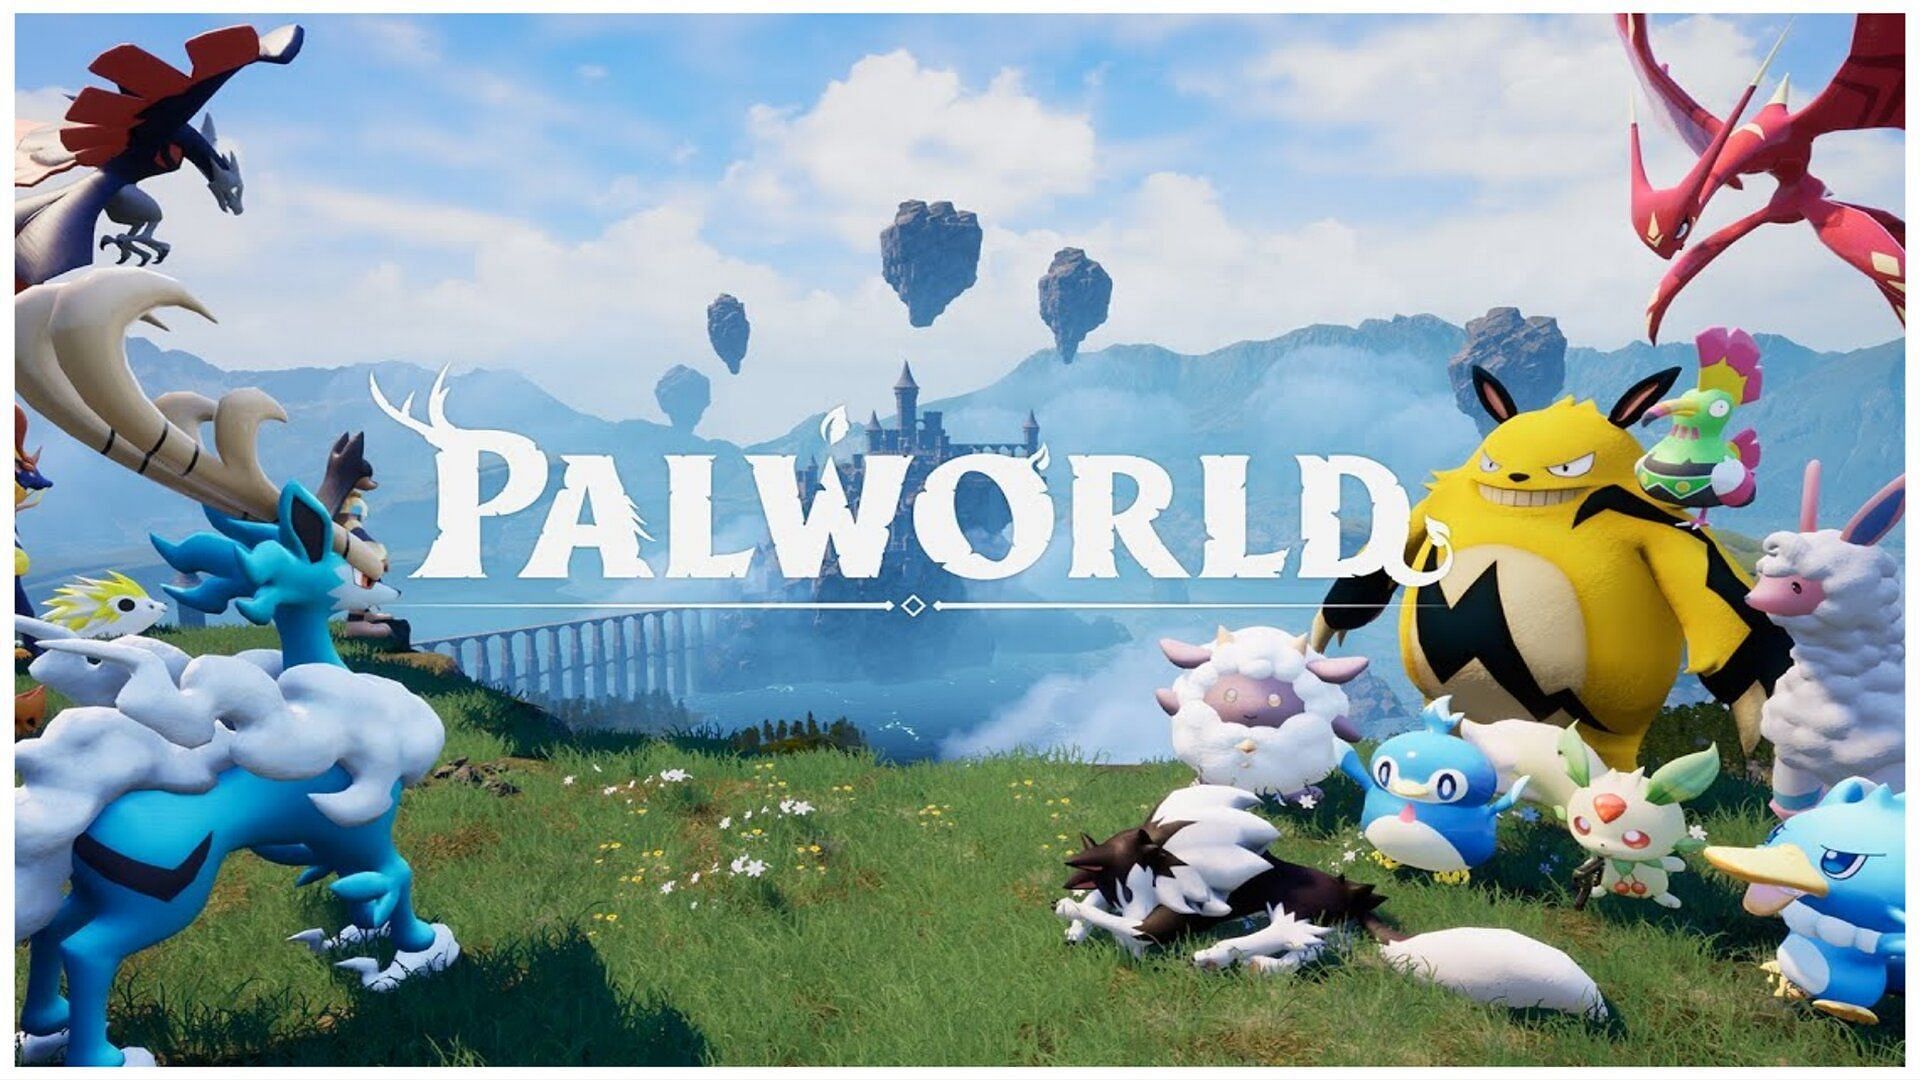 Palworld is a game which features monster/pal-oriented gameplay that is set on an vast open map.